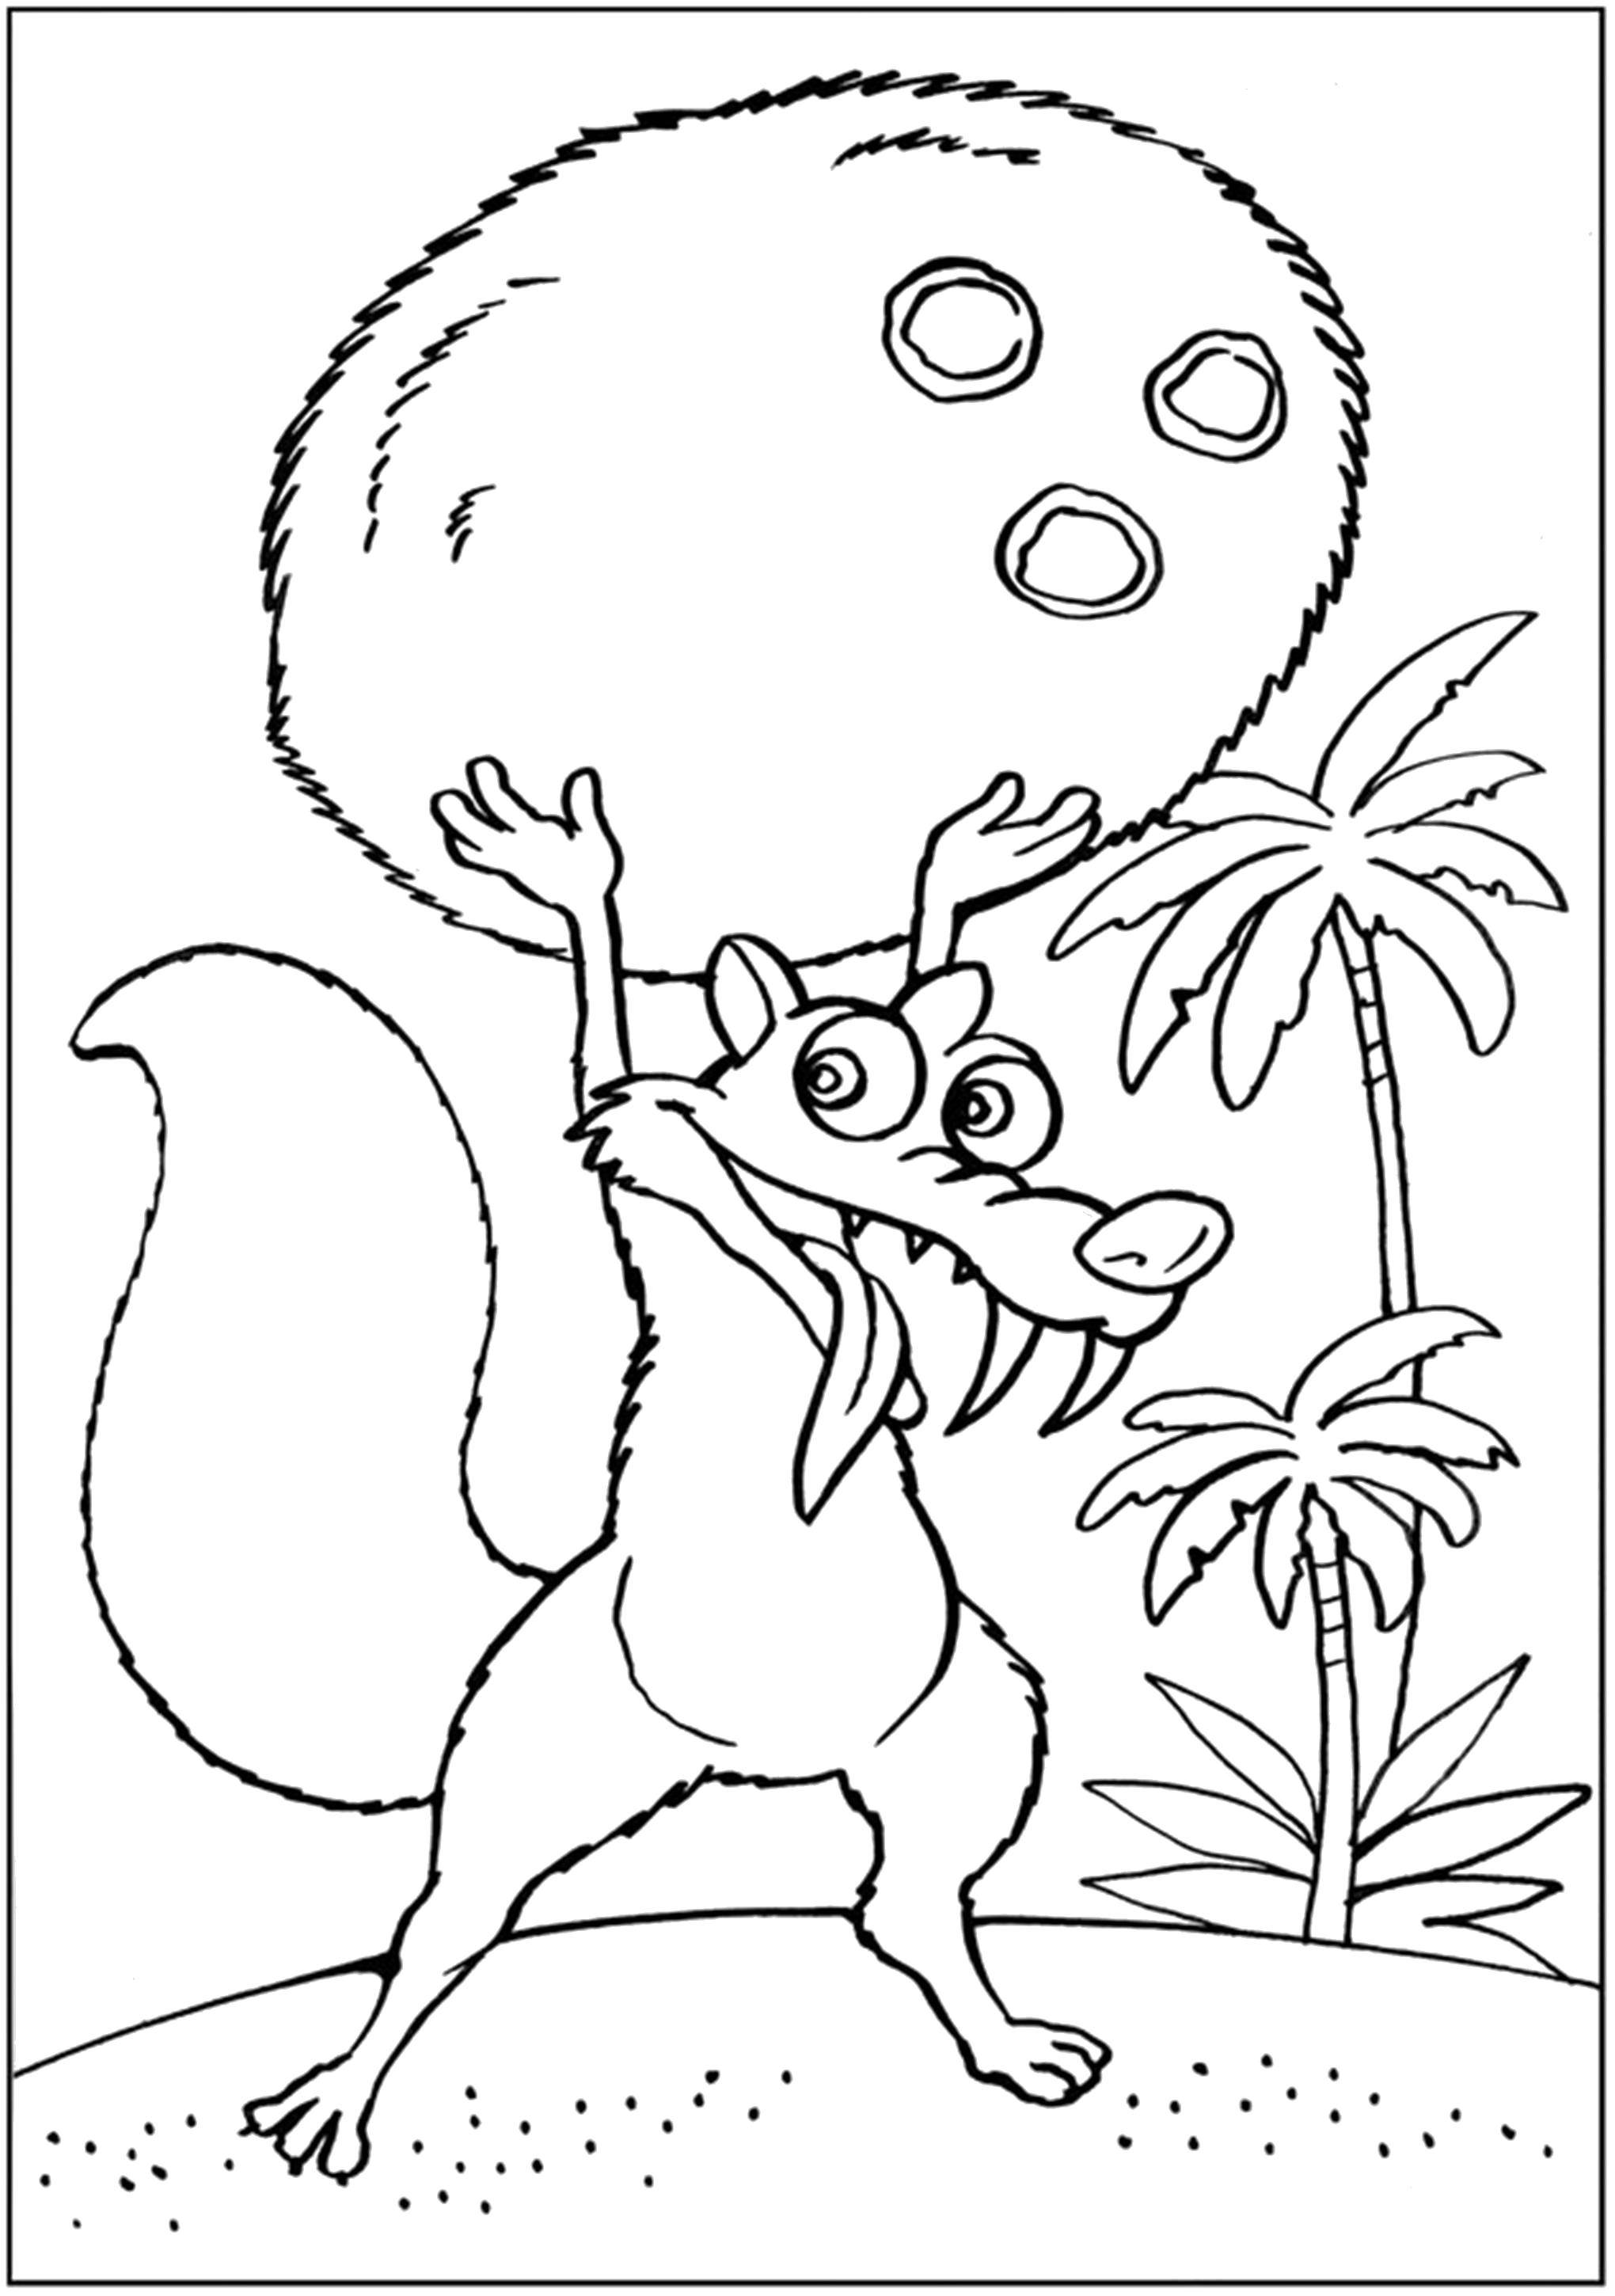 Coloring Squirrel from ice age. Category Disney coloring pages. Tags:  Disney, Ice age, squirrel.